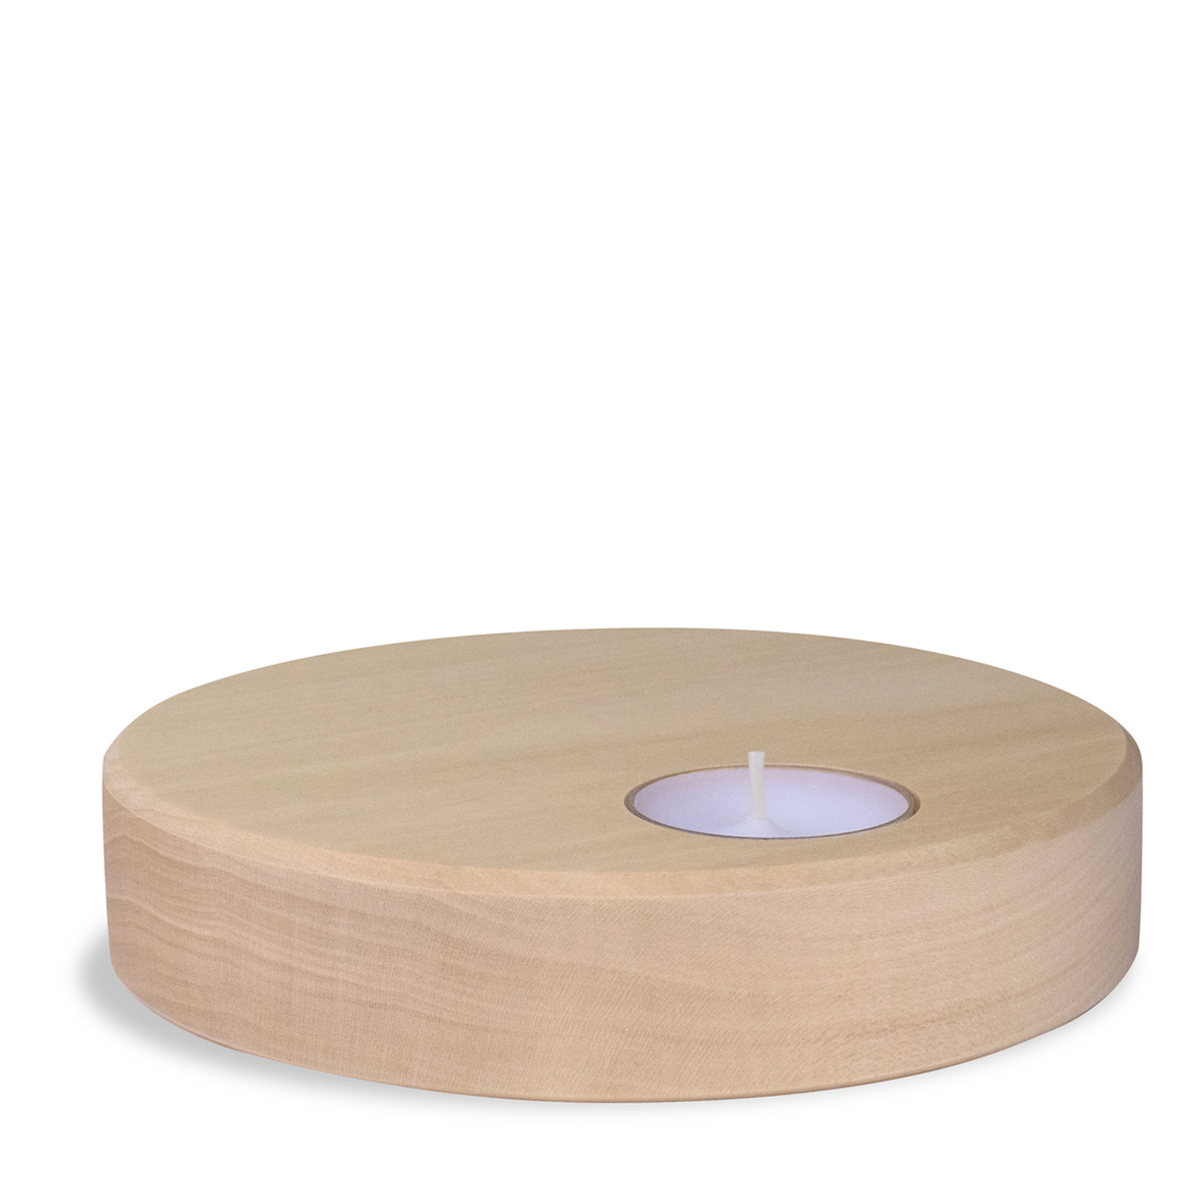 Decorative Base with Tealight, natural wood (without figures)